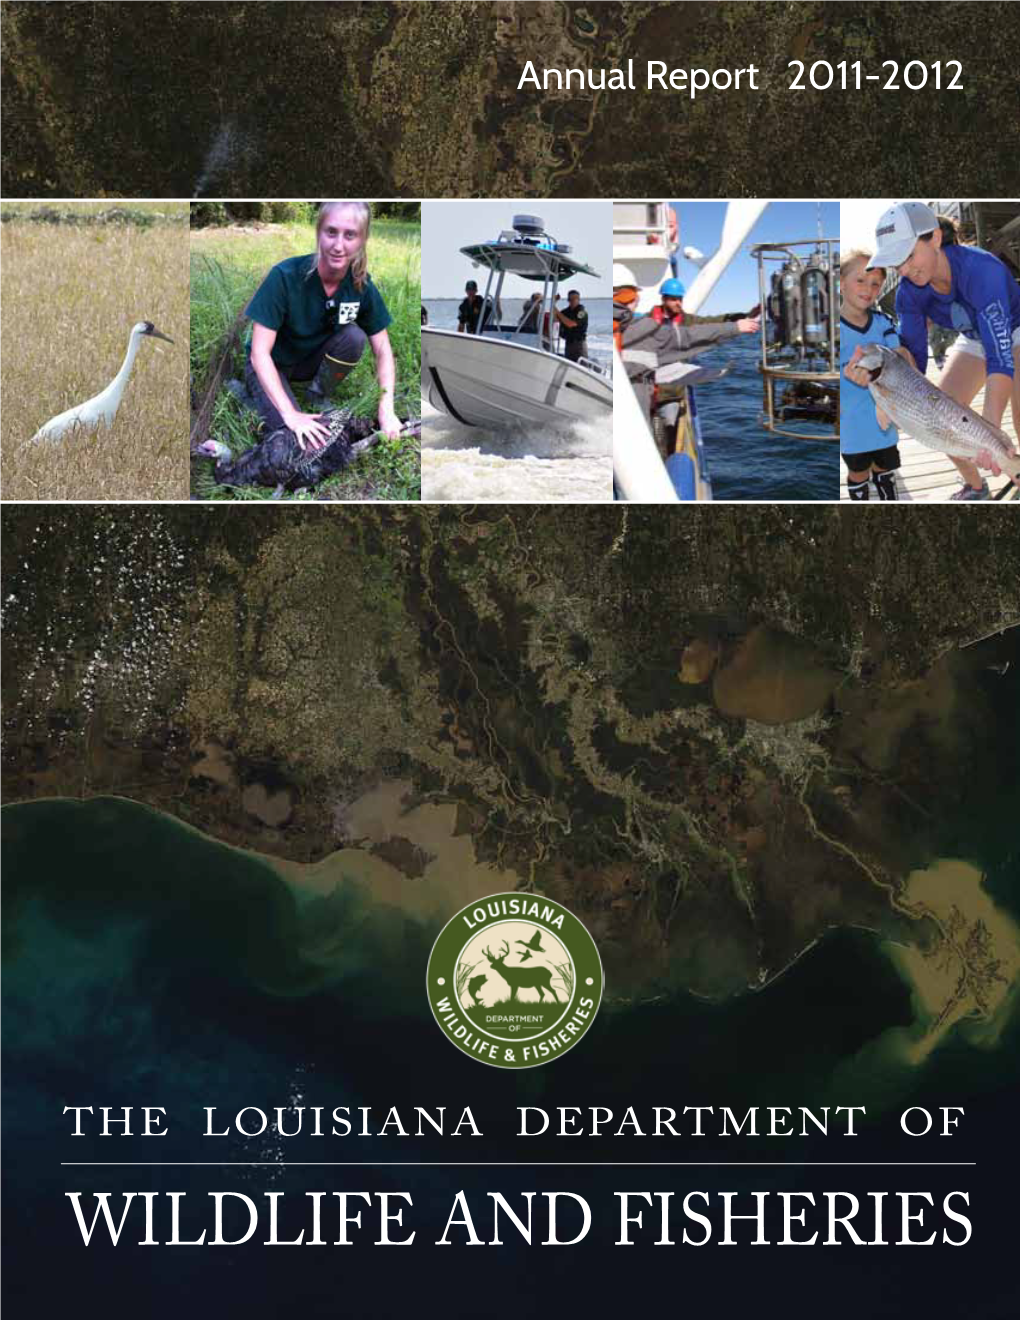 The Louisiana Department of Wildlife and Fisheries I